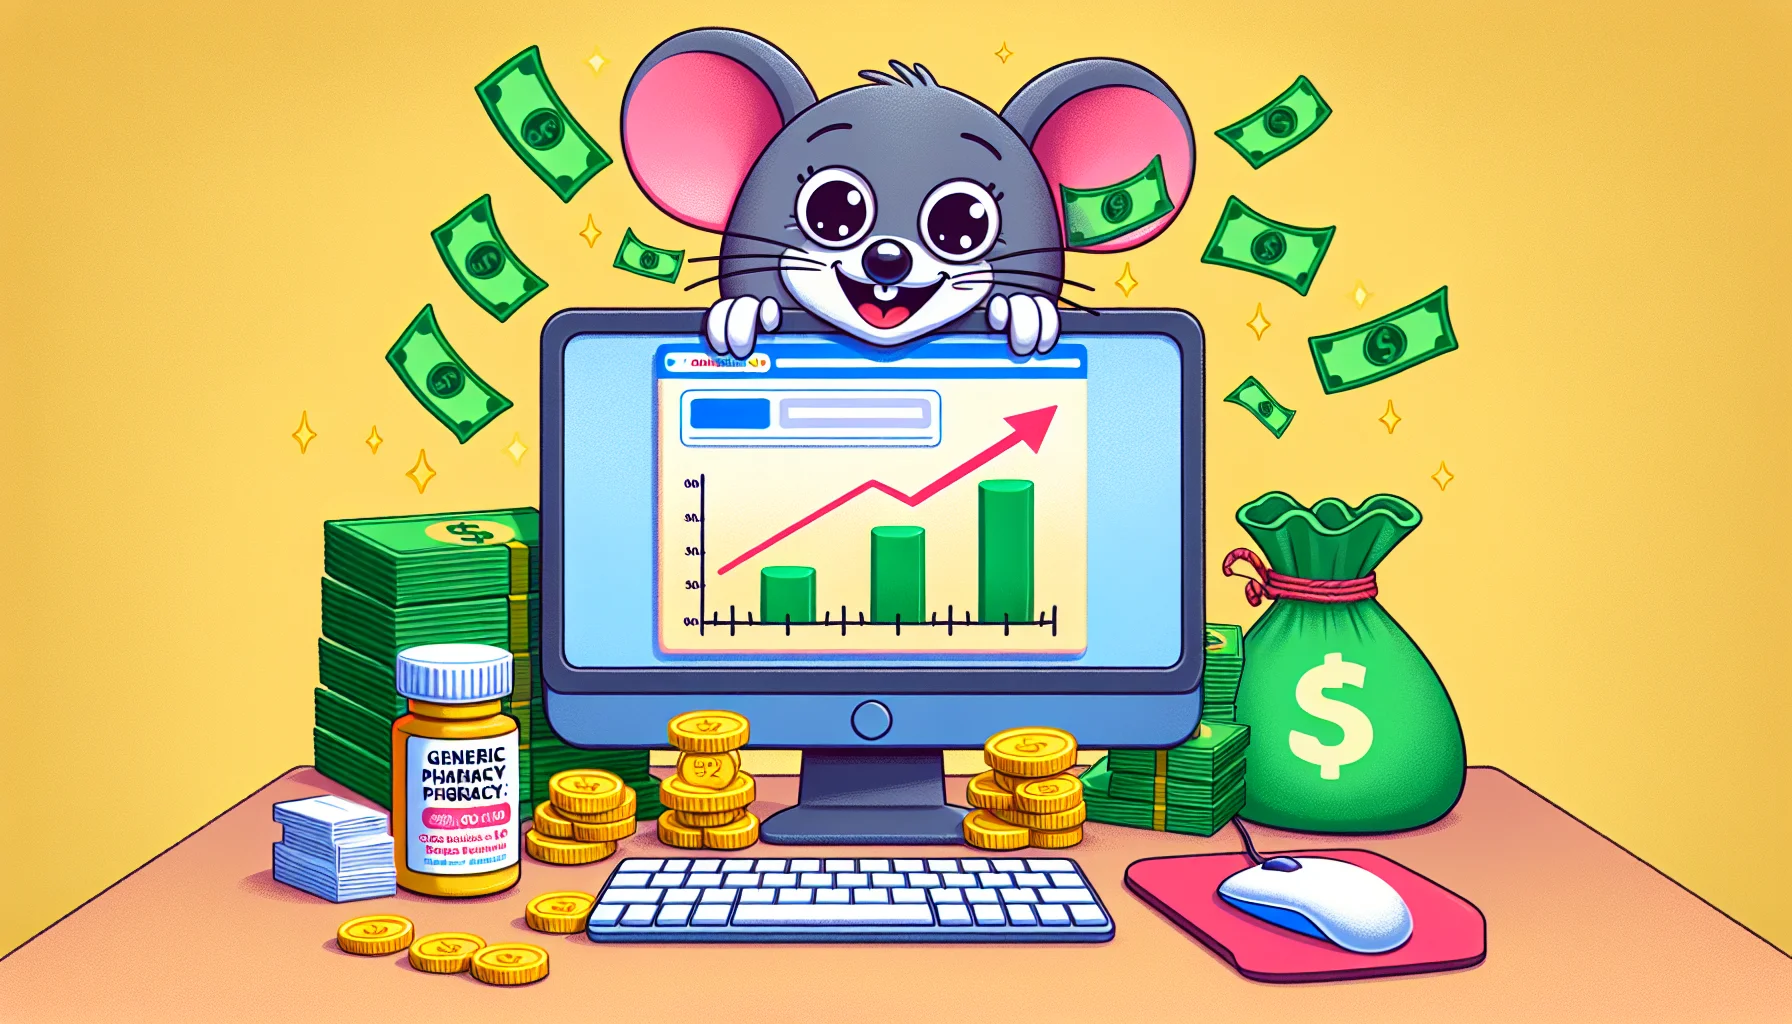 Illustrate an engaging and humorous scene related to an online affiliate program with a generic pharmacy retail chain. Picture this: A computer screen showing an increase in income on a graph chart. On the desk next to the computer, piles of dollar bills and coins. There's also an oversized mouse with googly eyes conveying a fun vibe from the internet shopping world. To add a twist of humor, imagine the computer screen has a big nose and a smile, alive with excitement as it watches the graph rise high. All this implies the potential prosperity one could achieve through online affiliate earnings.